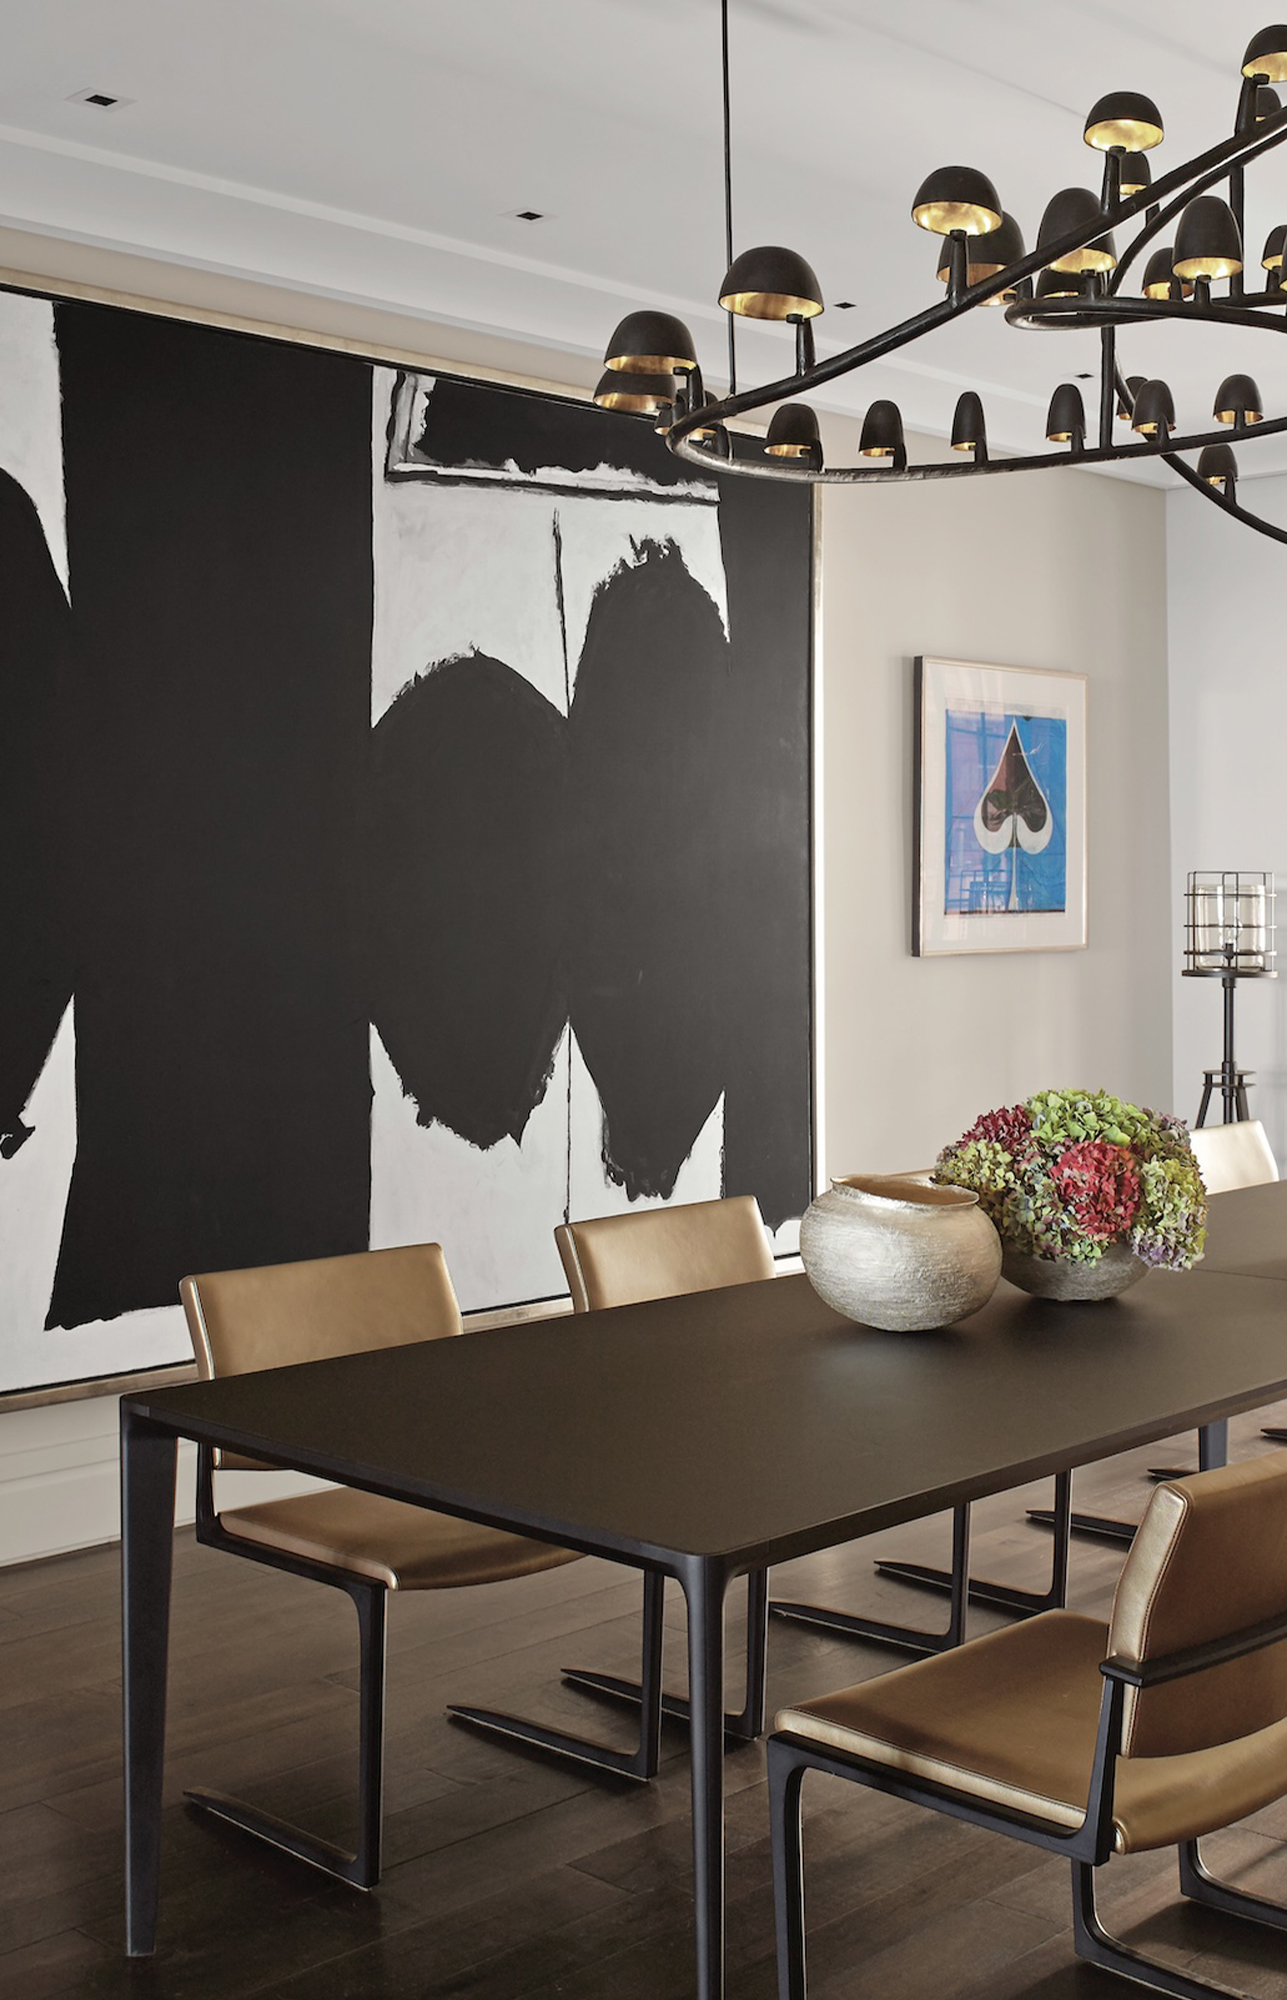 House-of-Hunt-Interior-Design-Chicago-Dining-Room-With-Large-Wall-Art-Mobile